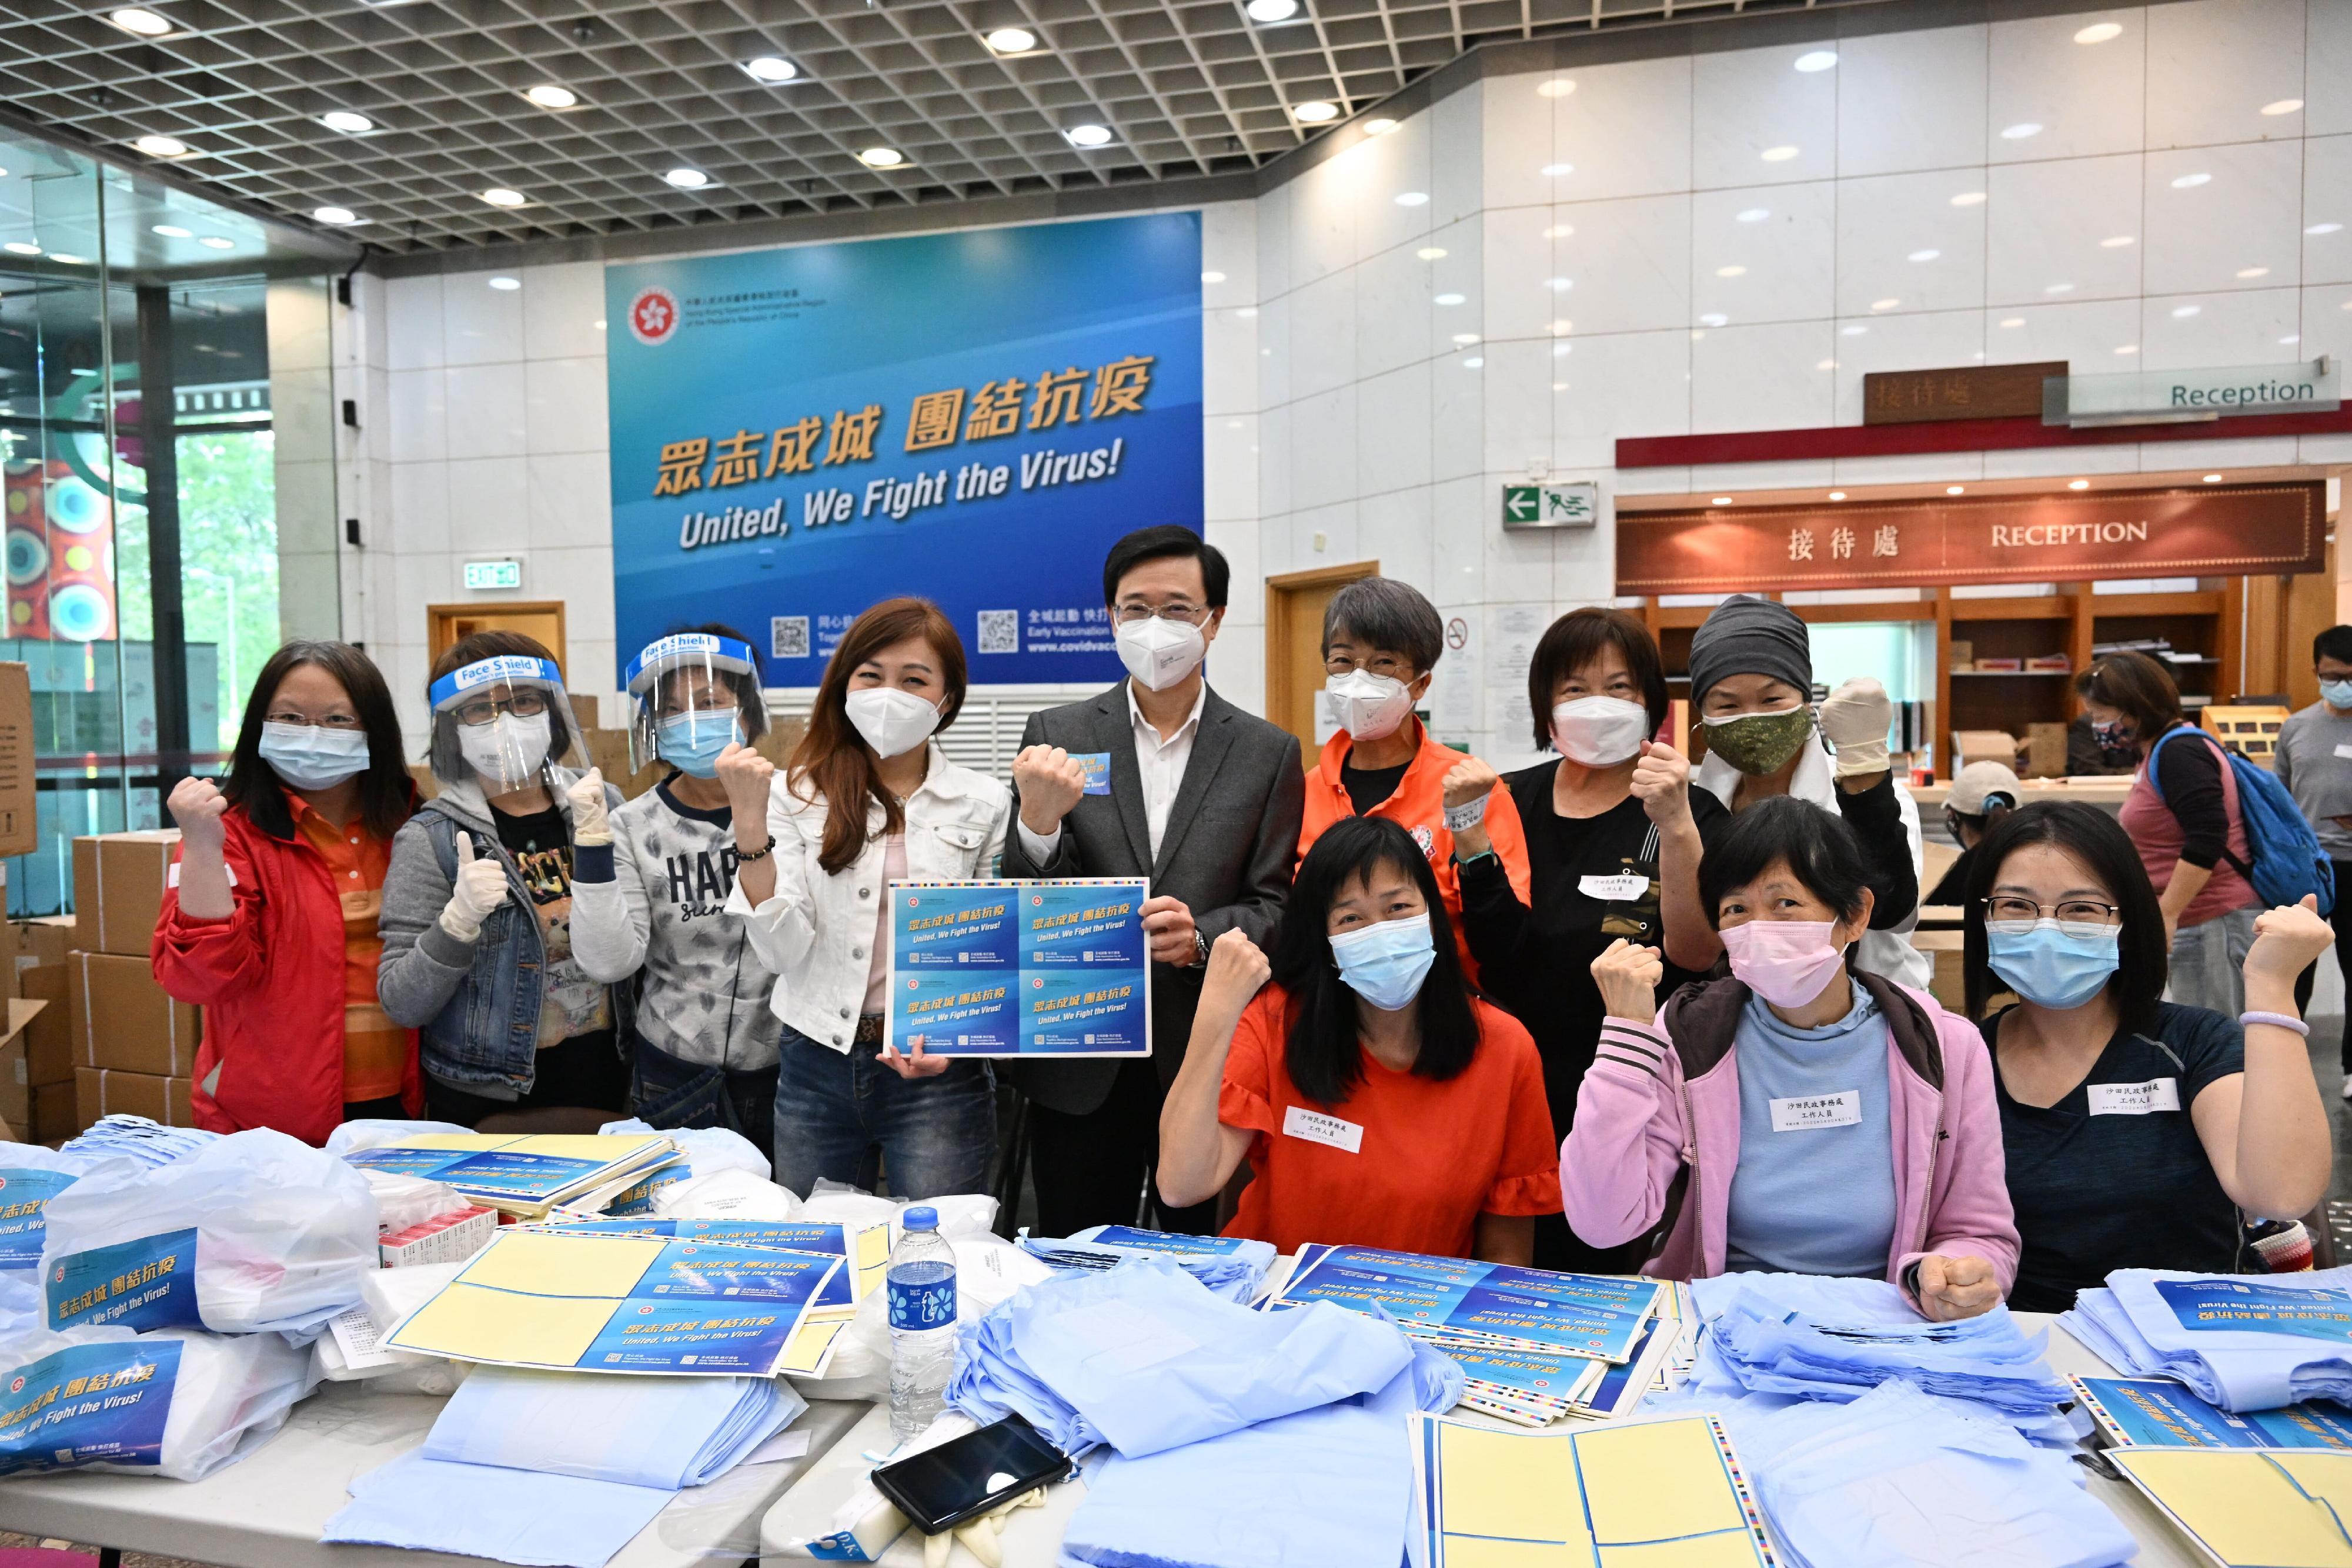 The Chief Secretary for Administration, Mr John Lee, today (March 30) visited the anti-epidemic service bag packaging centres located at Lai Kok Community Hall in Sham Shui Po and the Hong Kong Heritage Museum in Sha Tin to show his support for civil service colleagues and volunteers from different sectors of the community. Photo shows Mr Lee (back row, fifth left) and volunteers from different sectors of the community at the anti-epidemic service bag packaging centre located at the Hong Kong Heritage Museum.